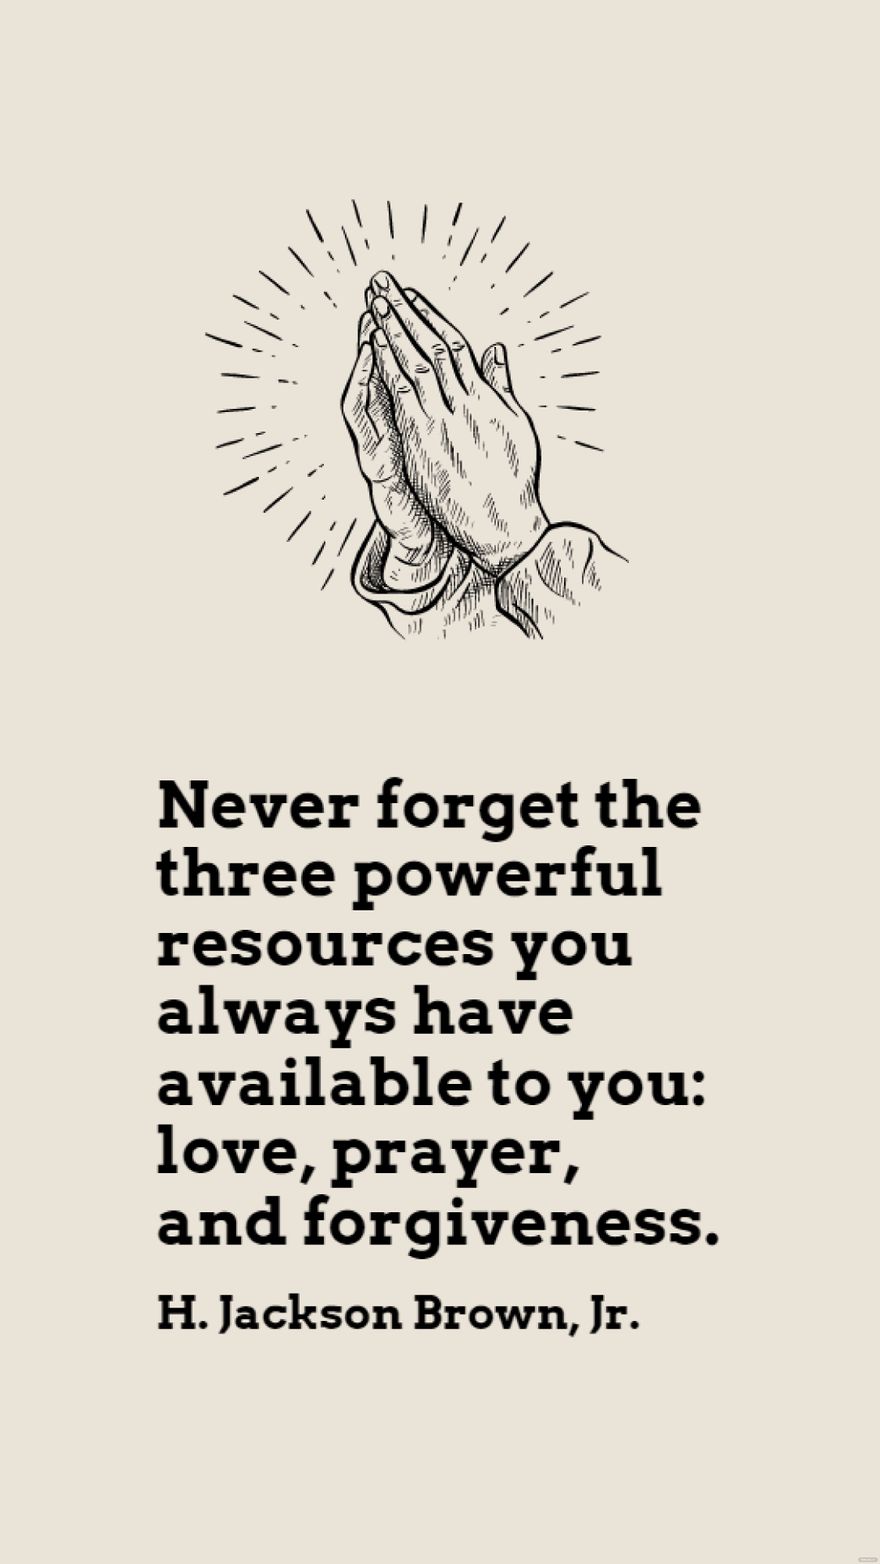 H. Jackson Brown, Jr. - Never forget the three powerful resources you always have available to you: love, prayer, and forgiveness. in JPG